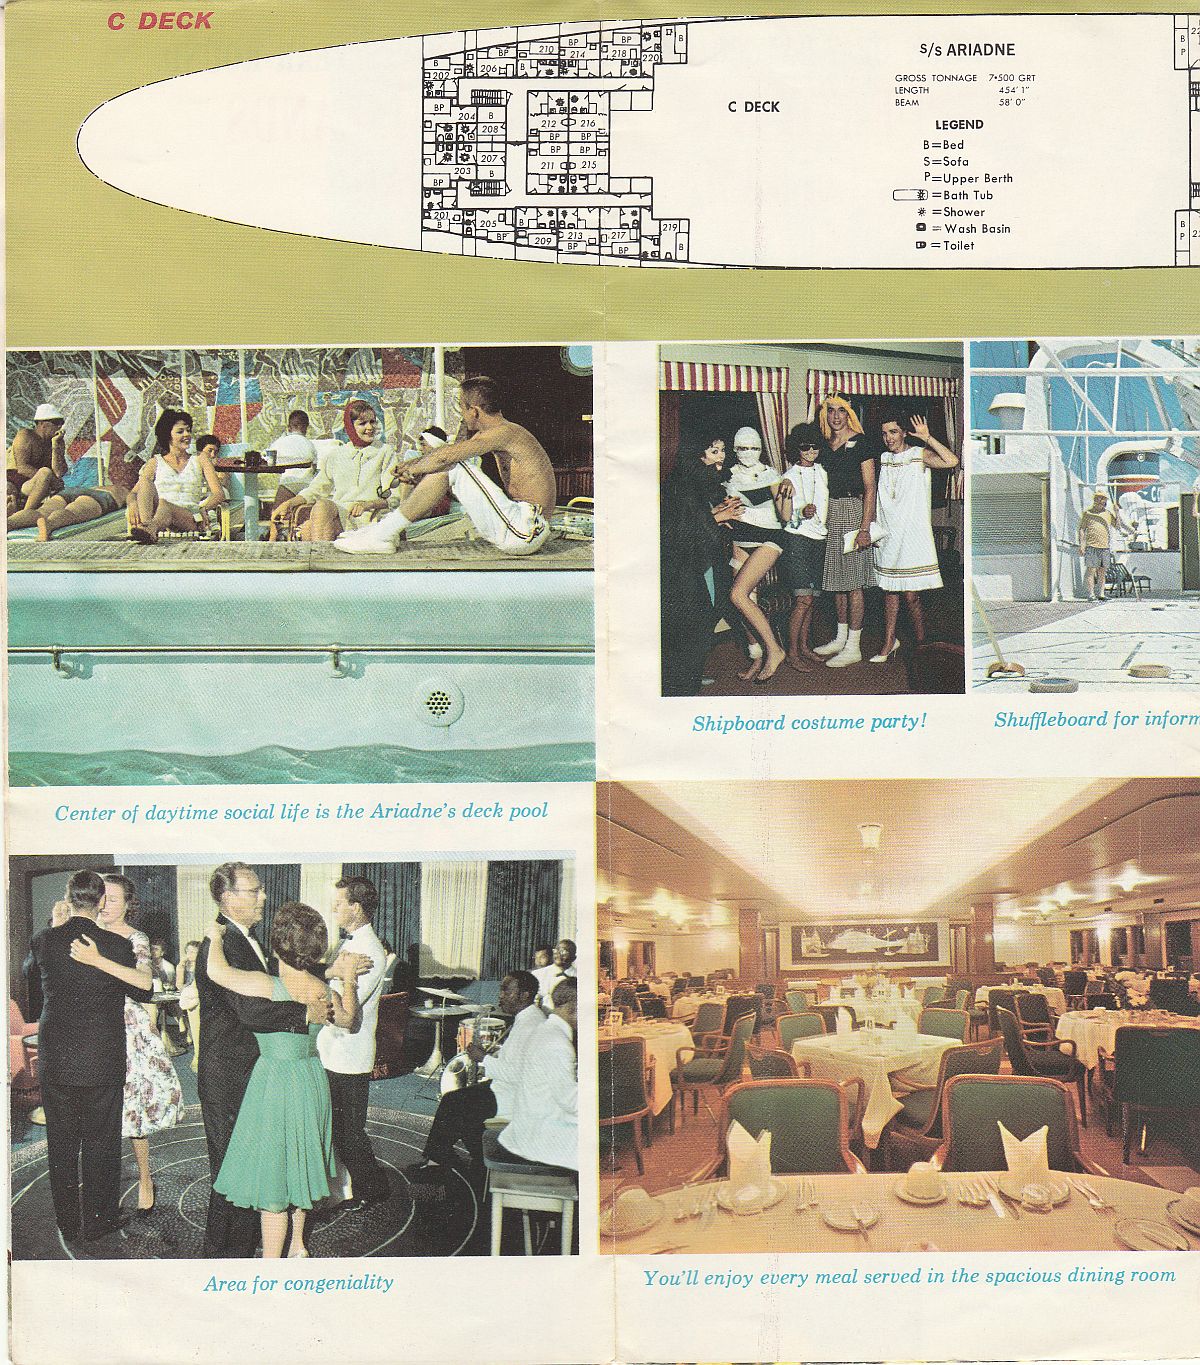 ss Ariadne Deck plan (cont'd) & ship photos: C-Deck (Bottom left page); Photos of pool, dining room, costume party, etc.